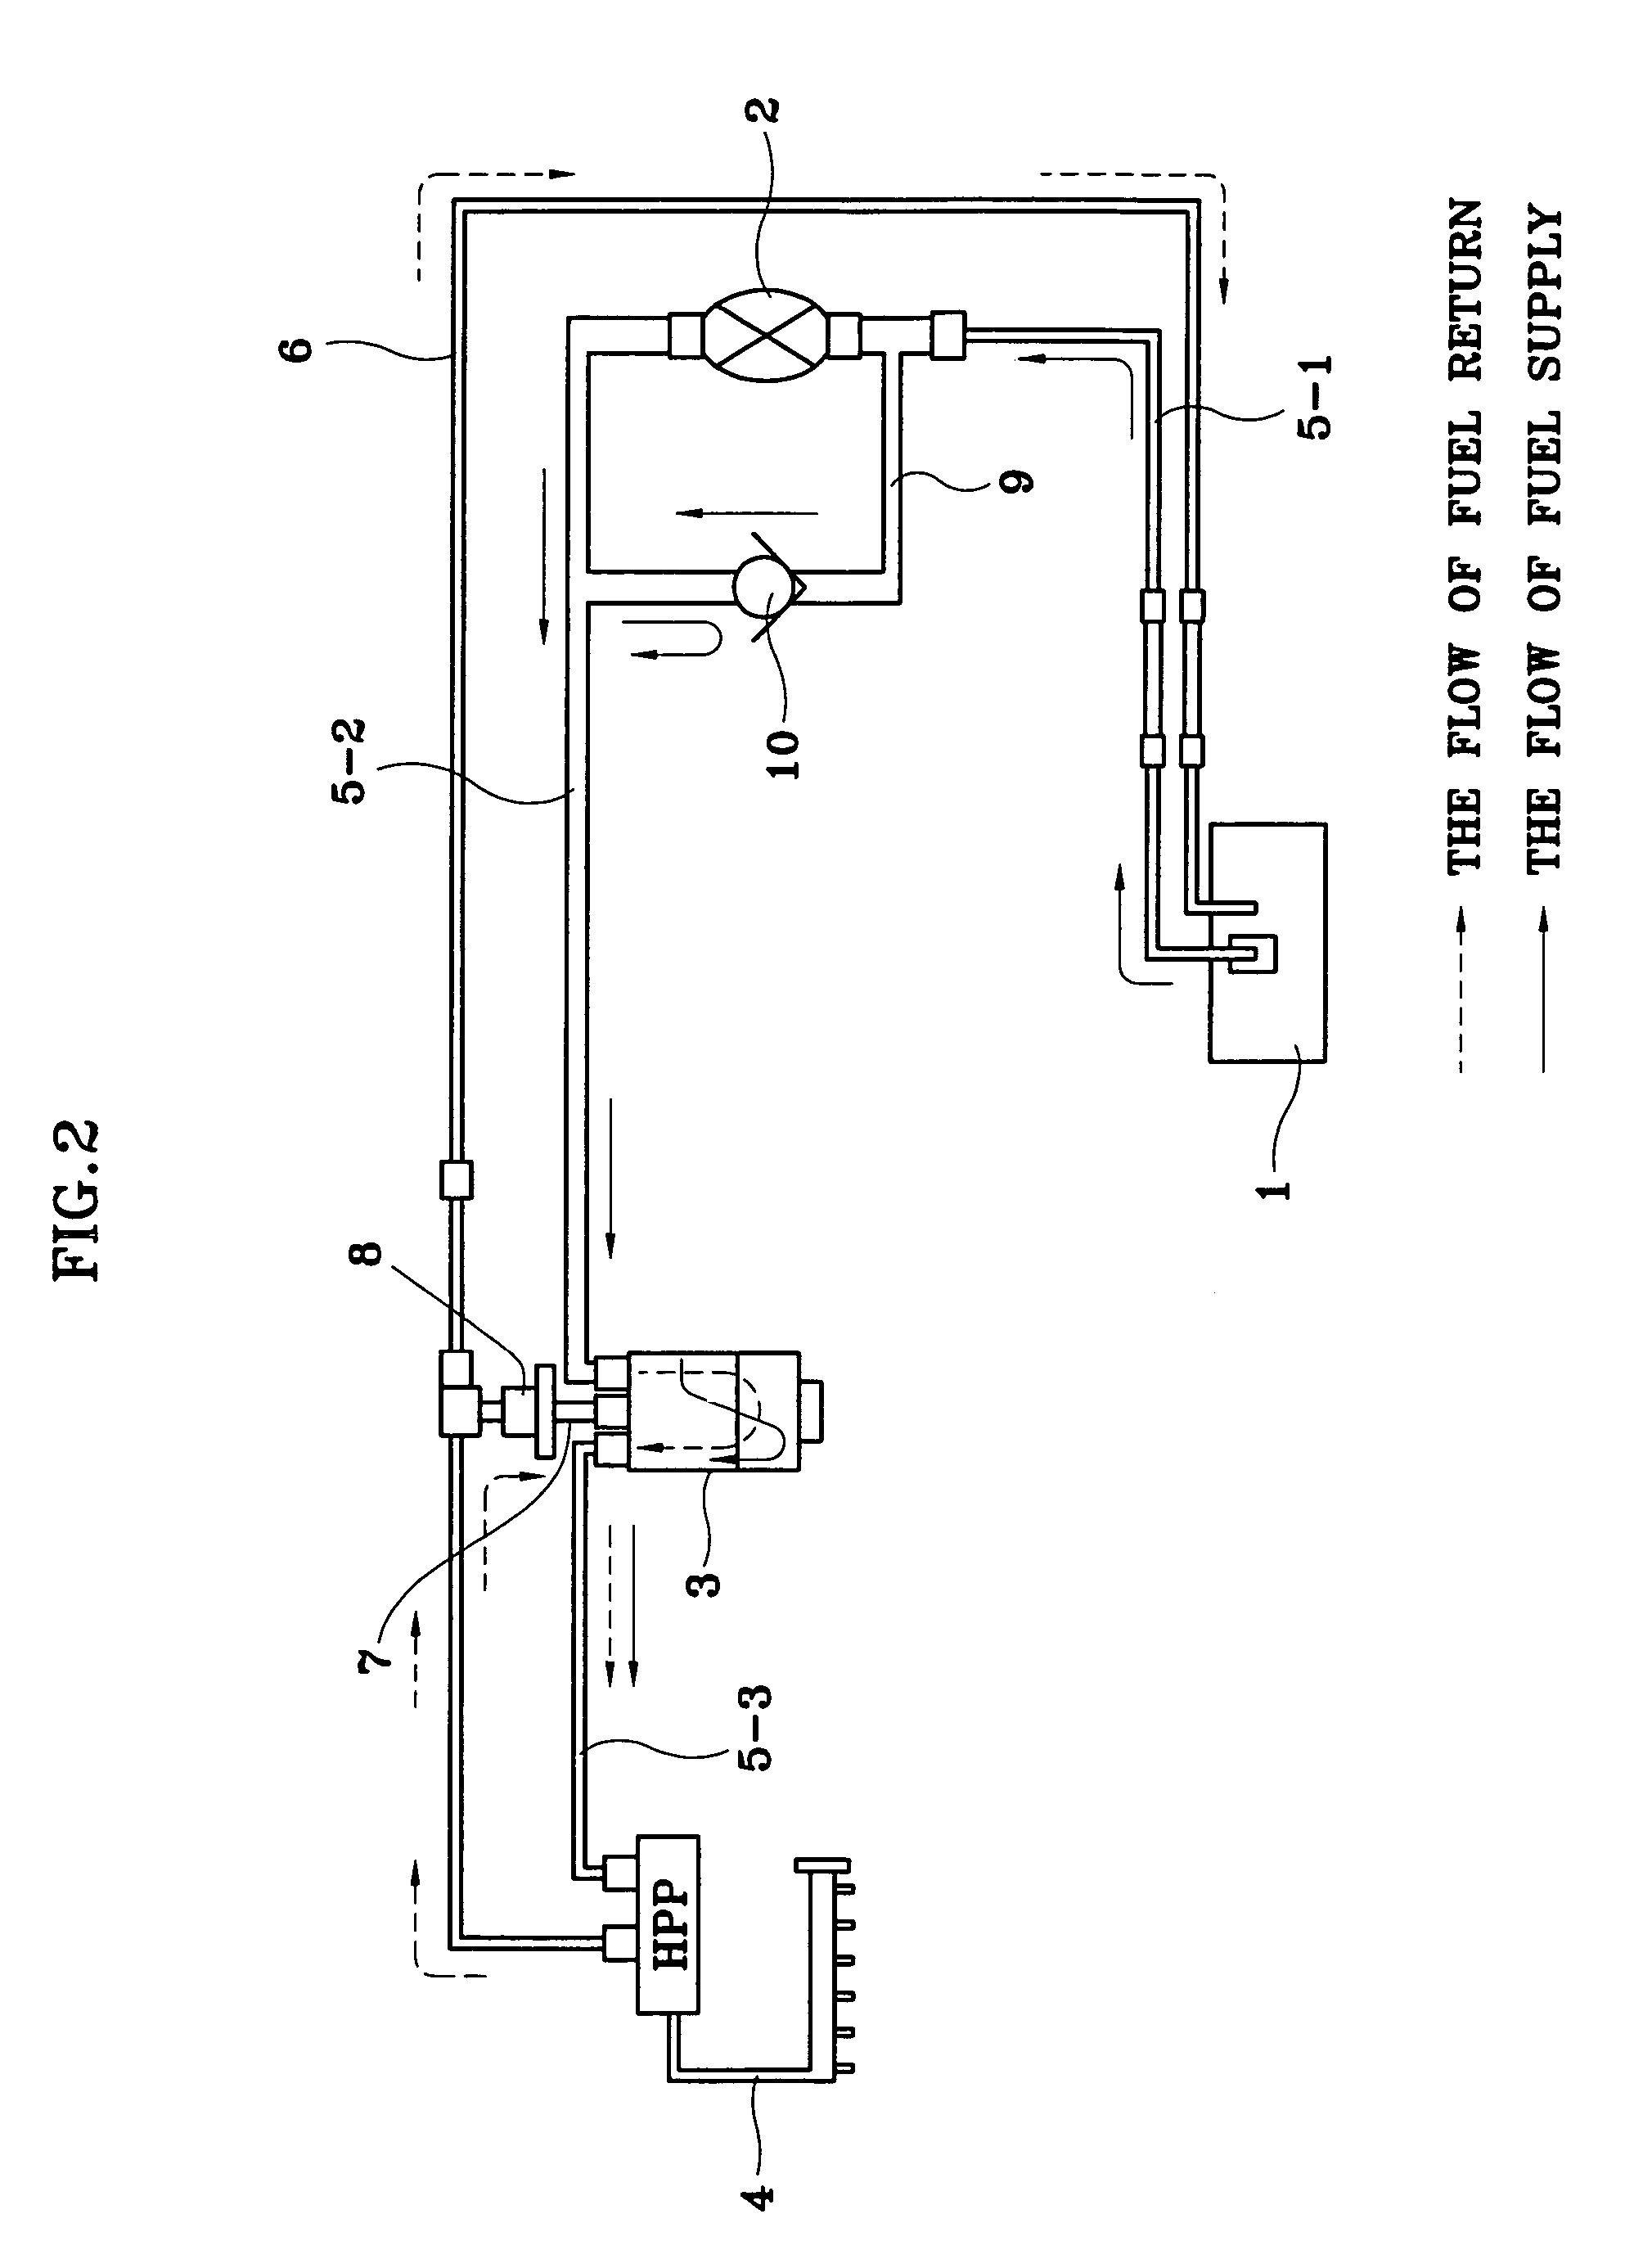 Diesel fuel supply system for preventing fuel pressure loss